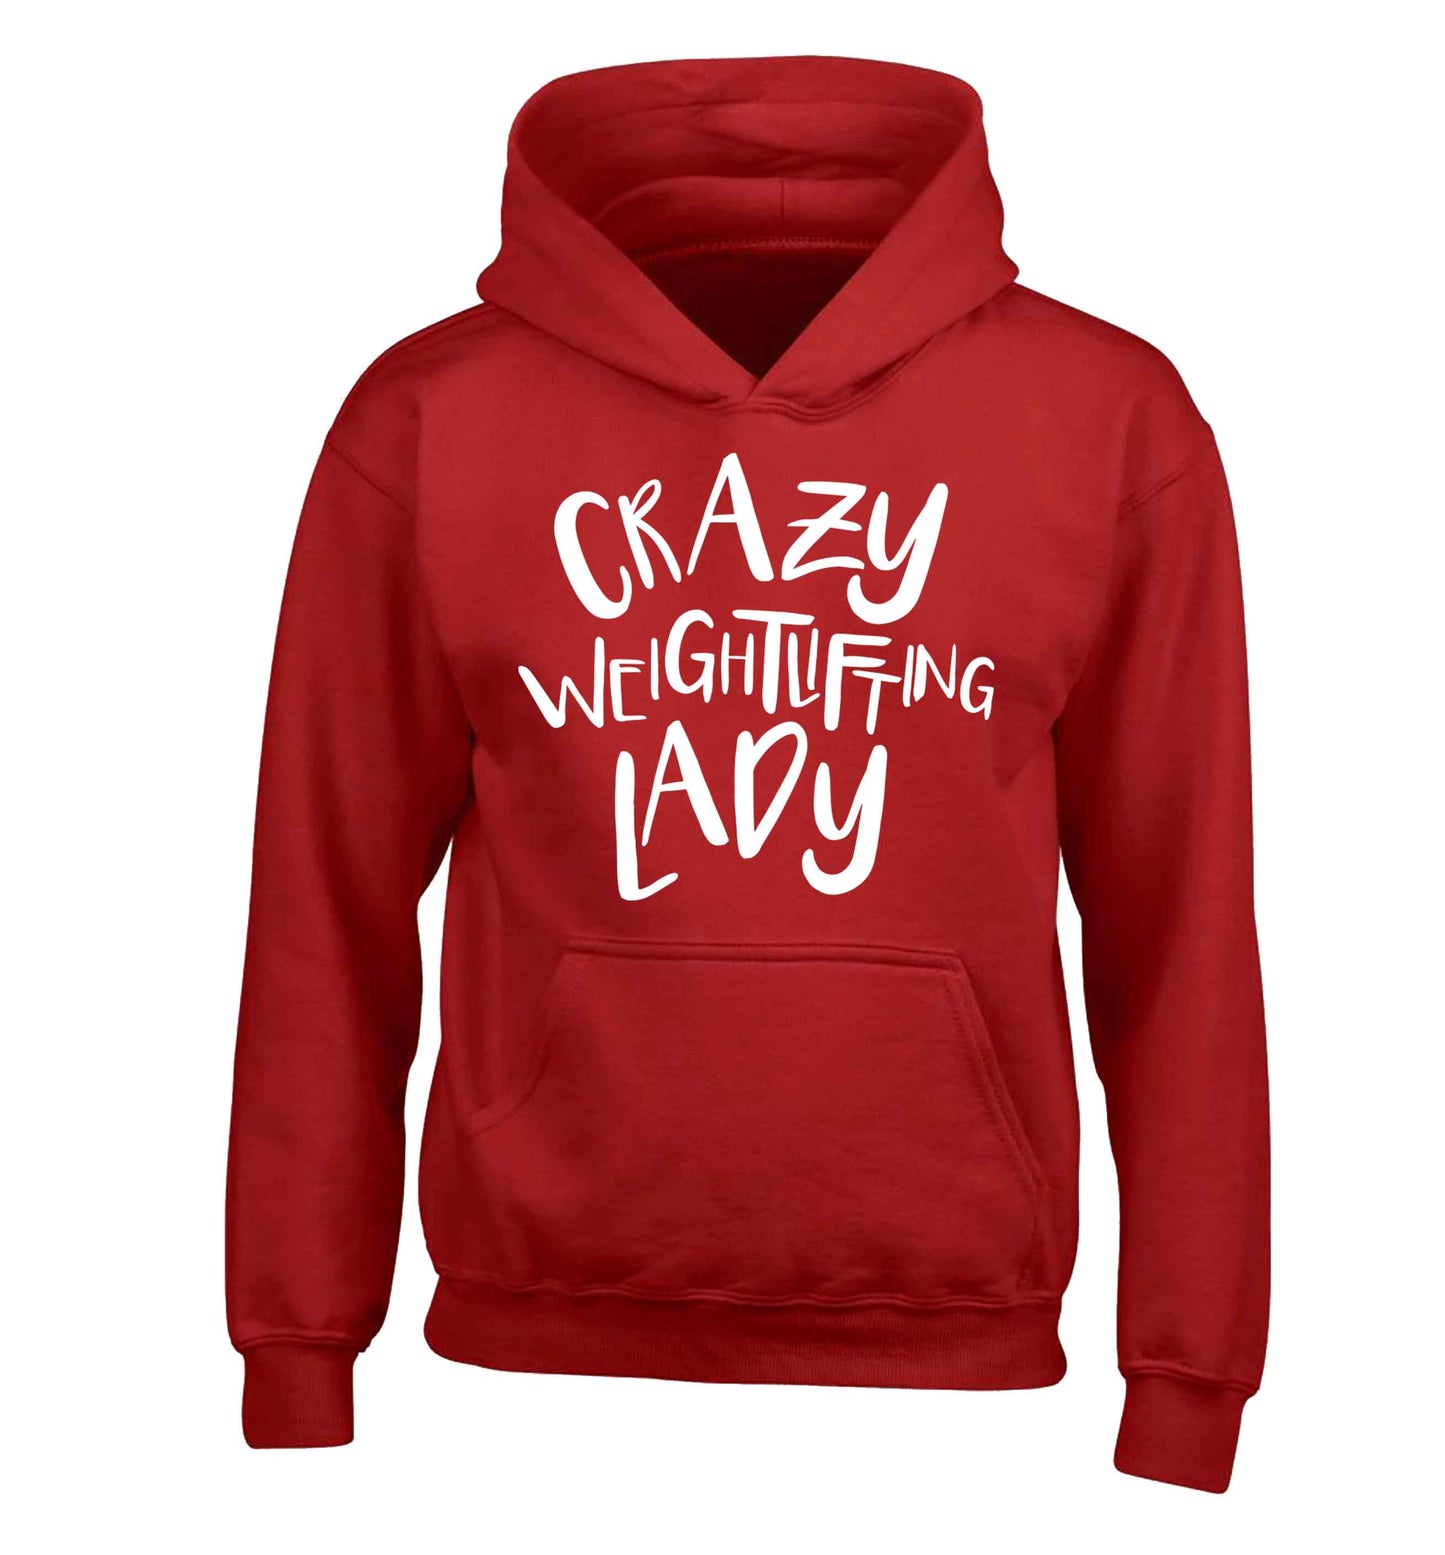 Crazy weightlifting lady children's red hoodie 12-13 Years